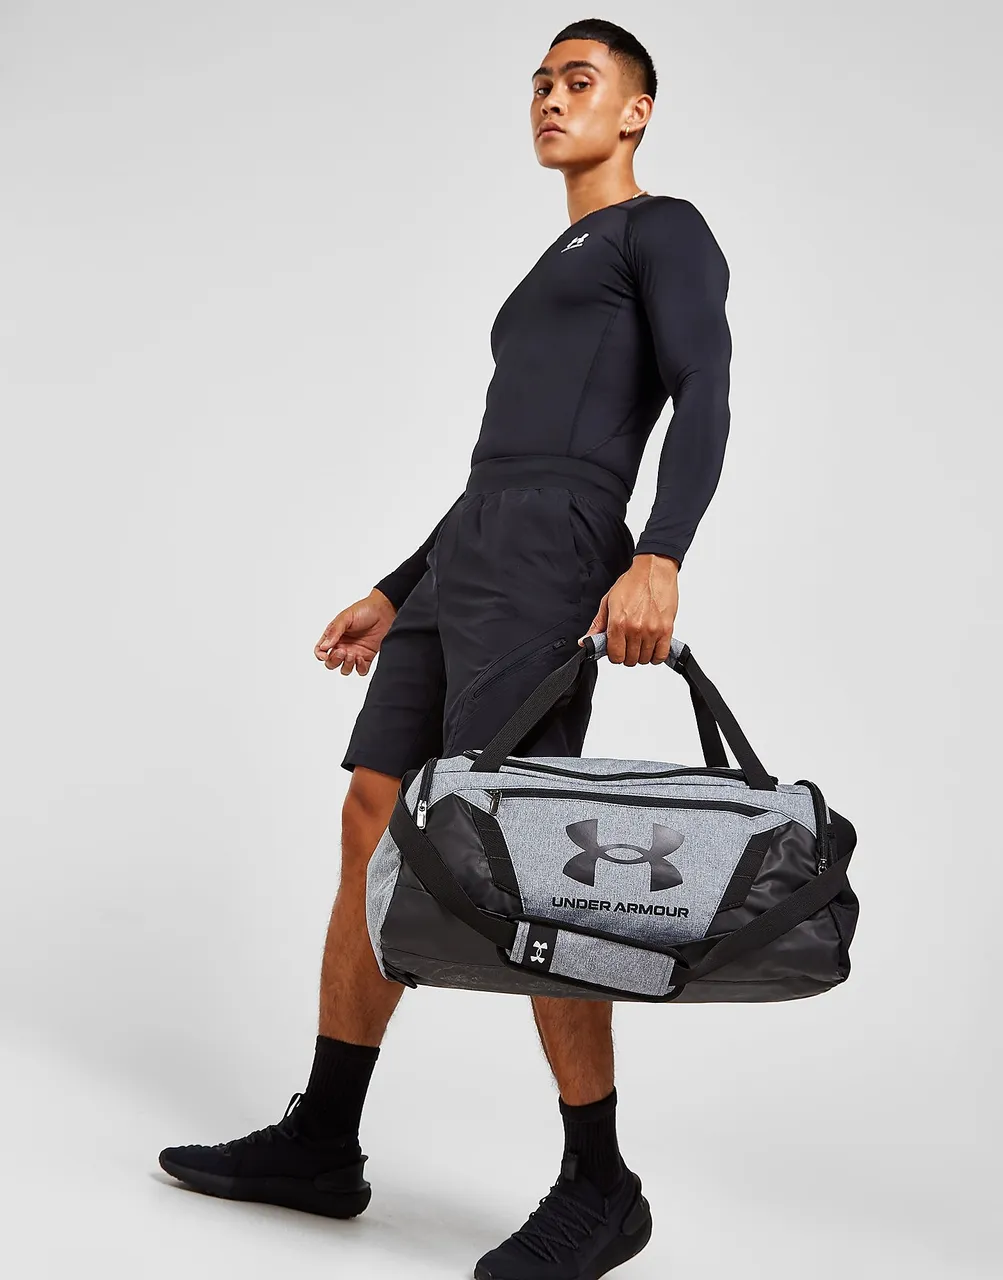 Under Armour Undeniable 5.0 Small Duffle Bag, Pitch Gray Medium Heather